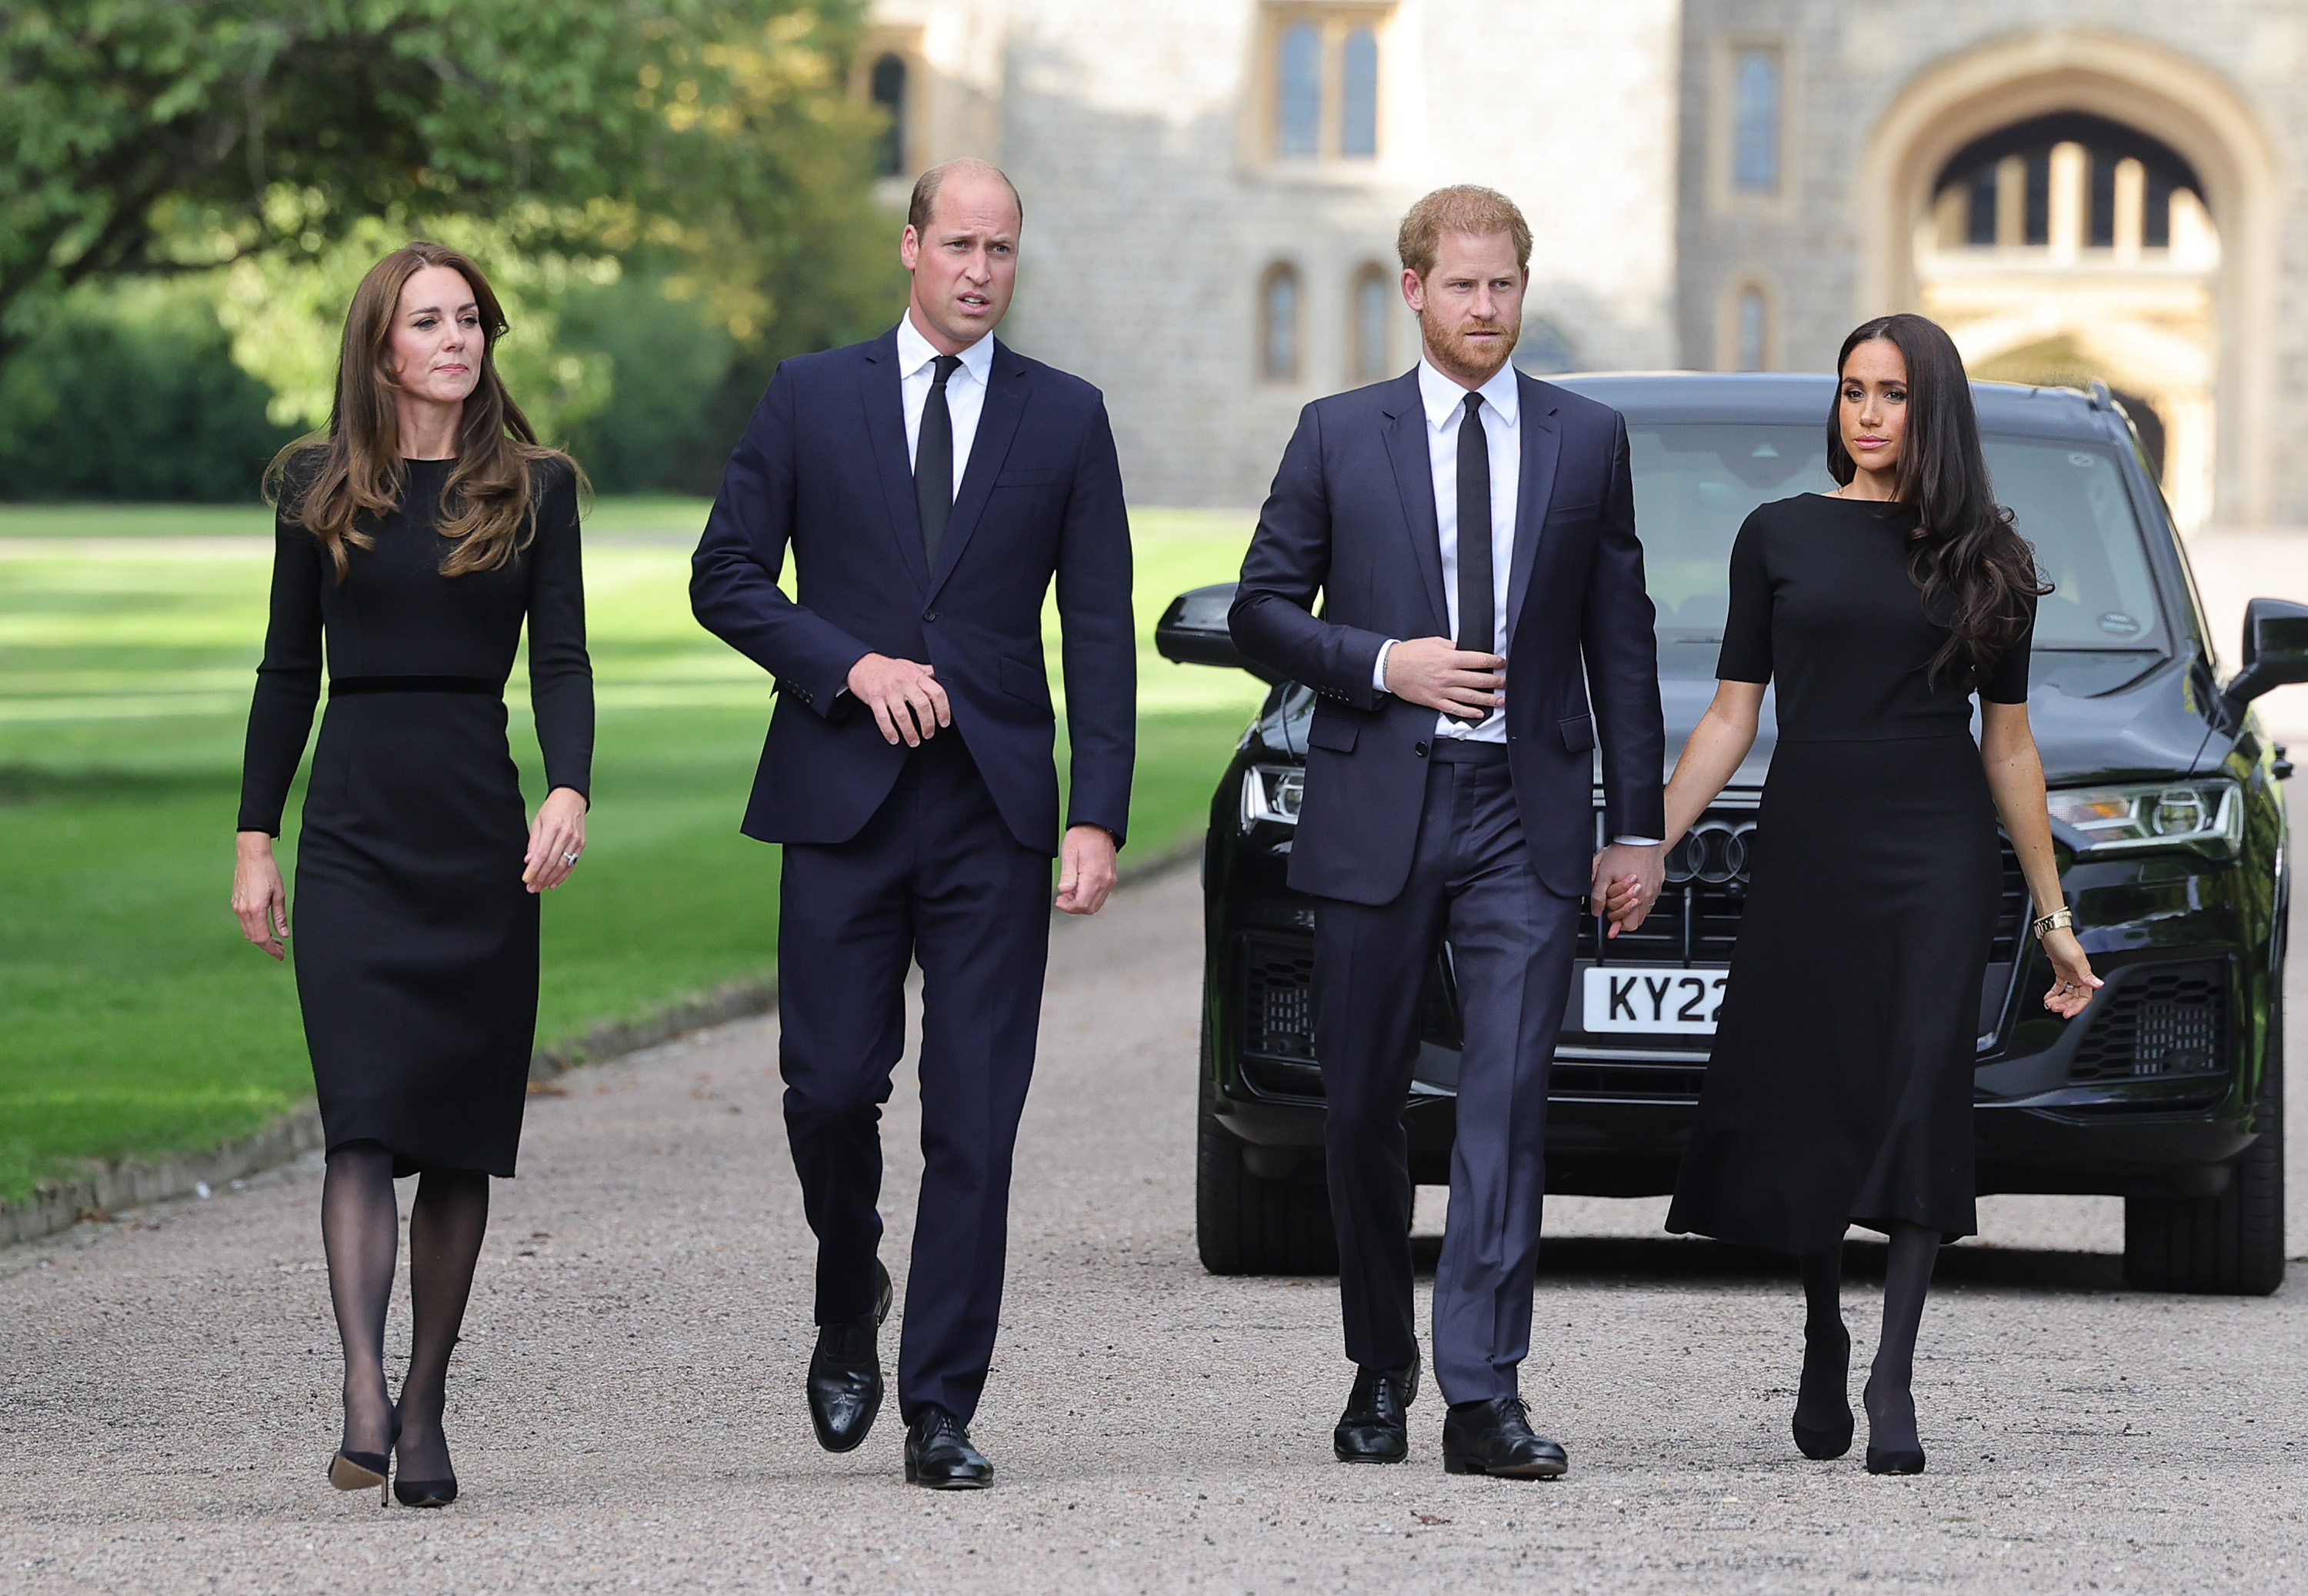 Catherine, Princess of Wales, Prince William, Prince of Wales, Prince Harry, Duke of Sussex, and Meghan, Duchess of Sussex arriving to view flowers and tributes to Queen Elizabeth II on September 10, 2022 in Windsor, England | Source: Getty Images